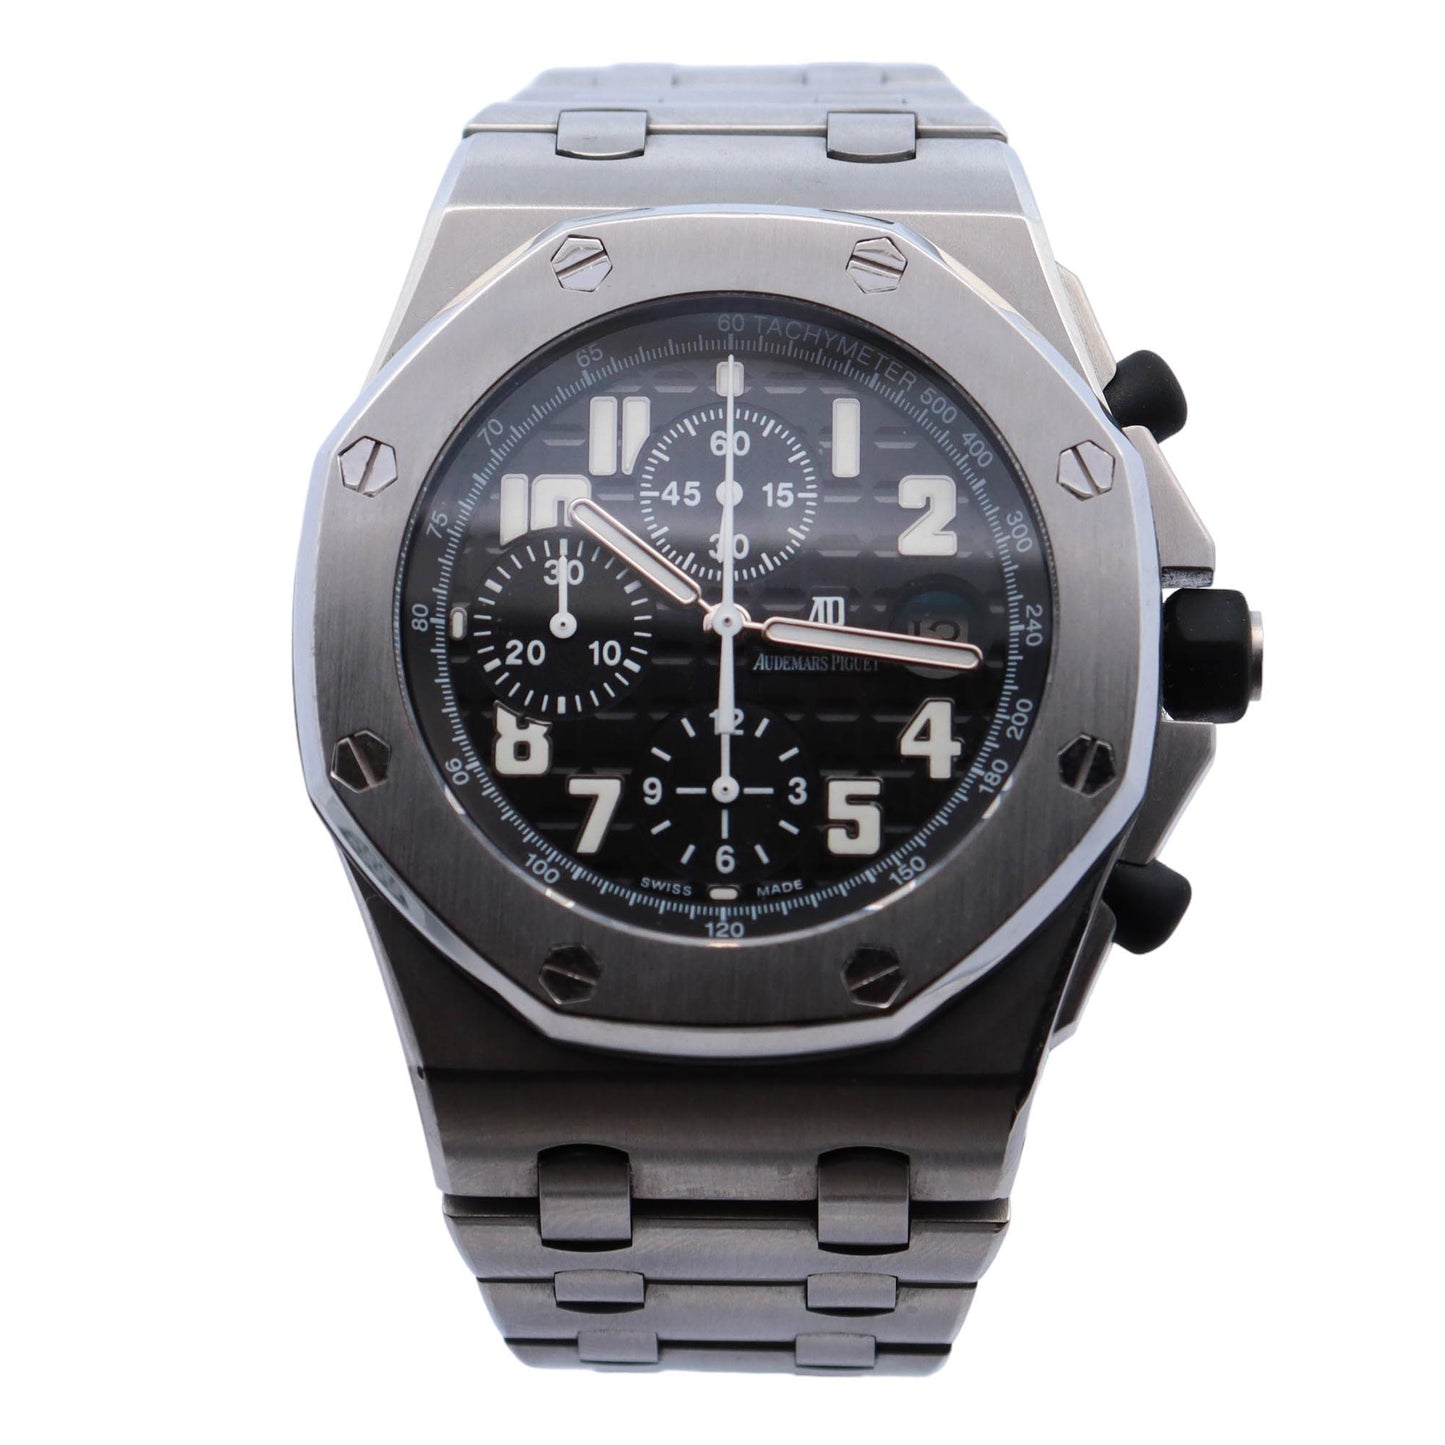 Audemars Piguet Royal Oak Offshore Stainless Steel 42mm Black Chronograph Dial Watch Reference# 26170ST.OO1000ST.08 - Happy Jewelers Fine Jewelry Lifetime Warranty